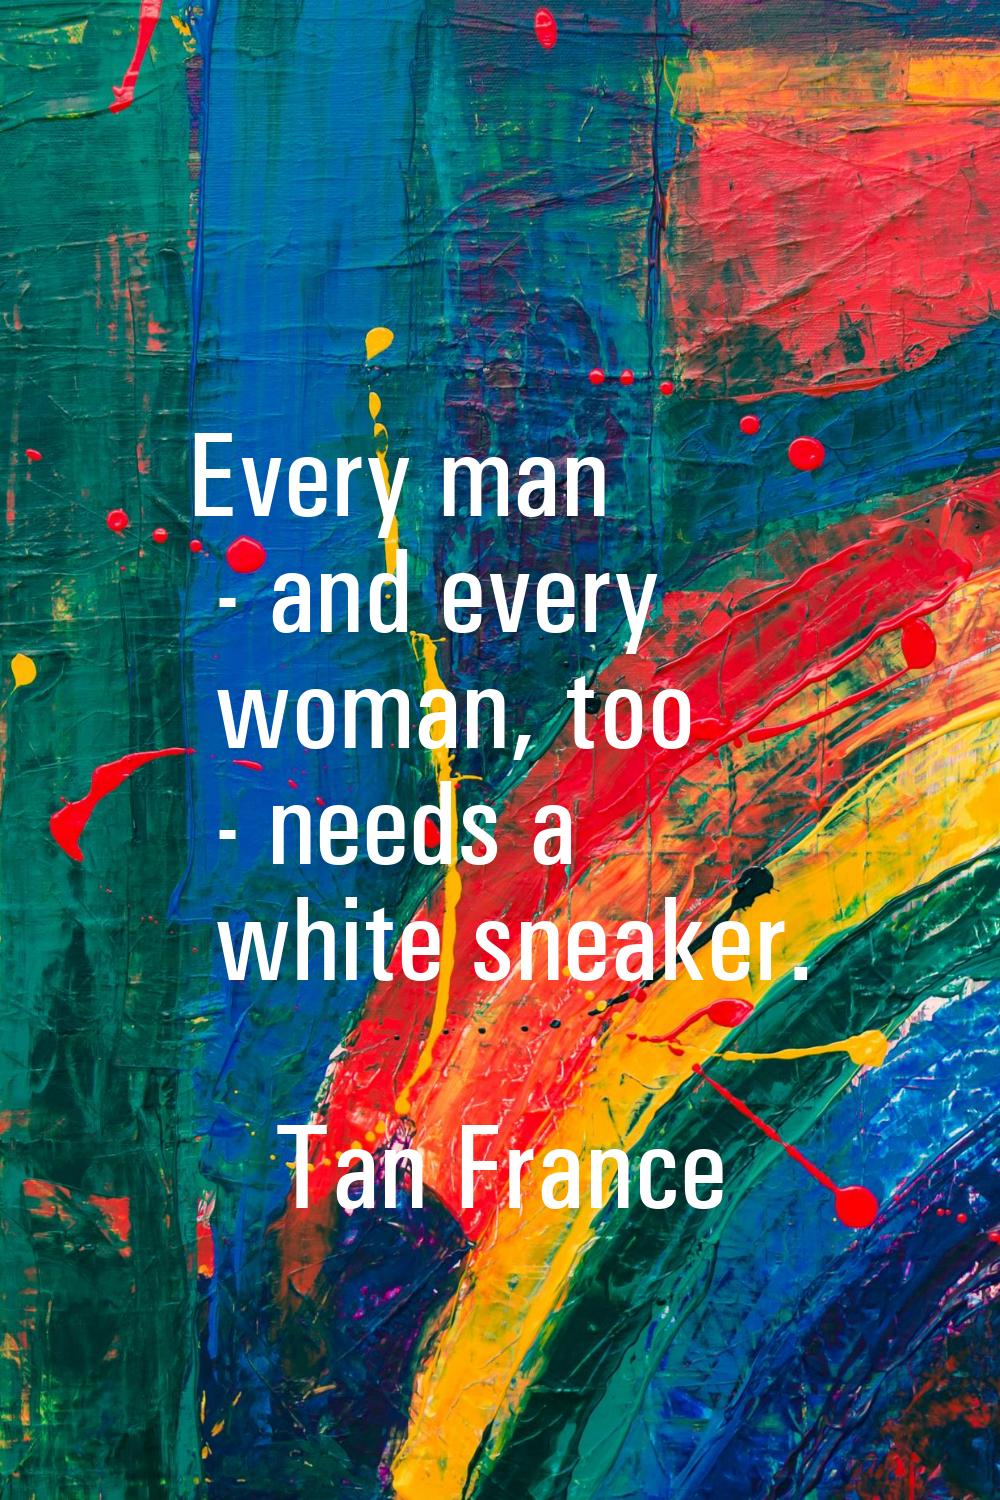 Every man - and every woman, too - needs a white sneaker.